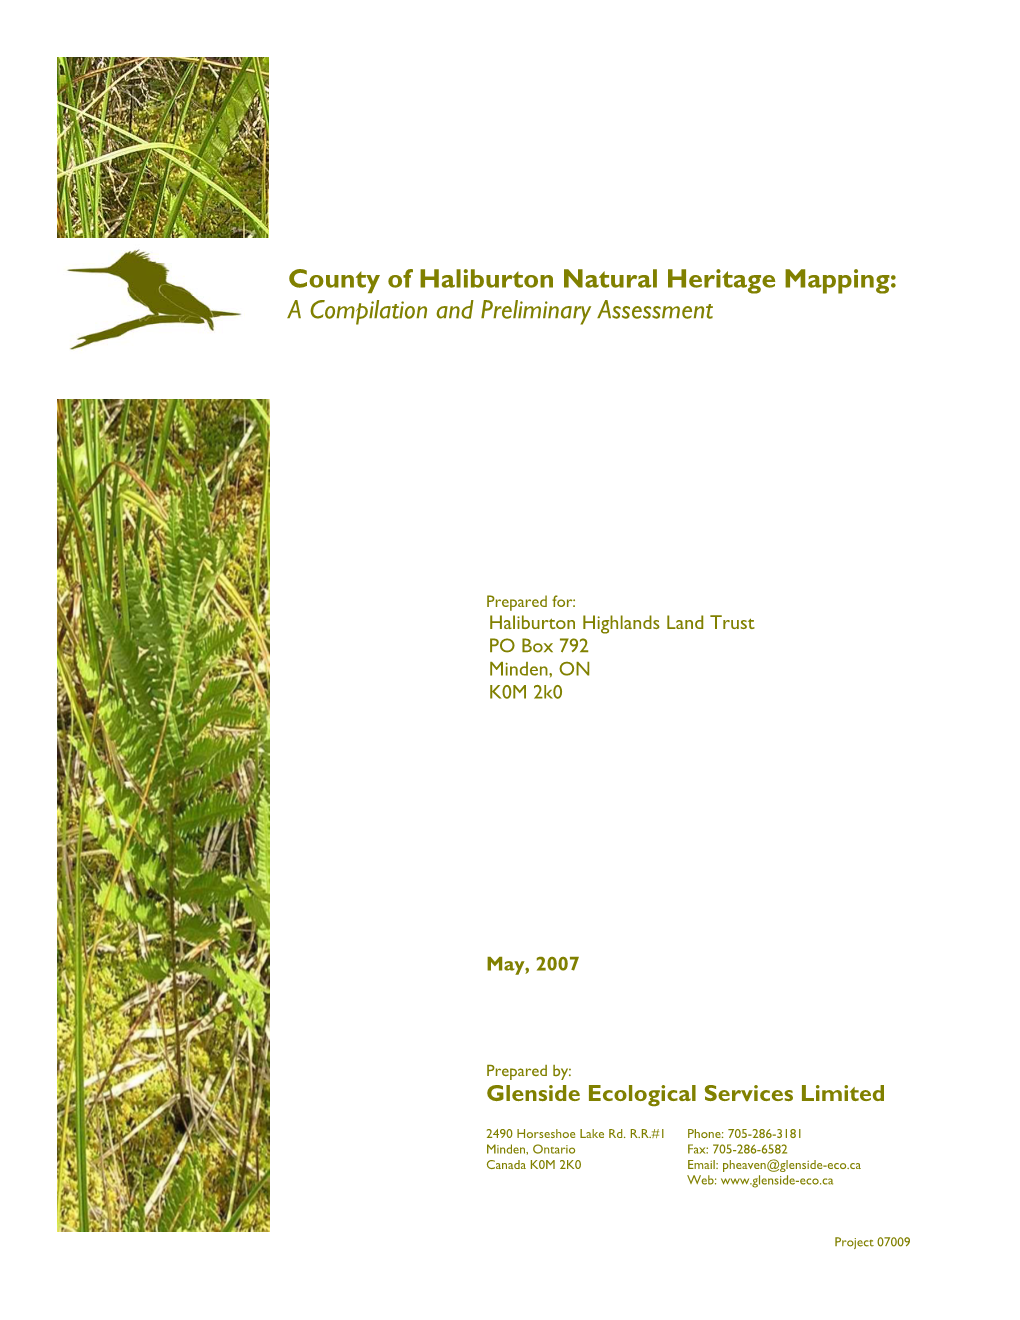 County of Haliburton Natural Heritage Mapping: a Compilation and Preliminary Assessment